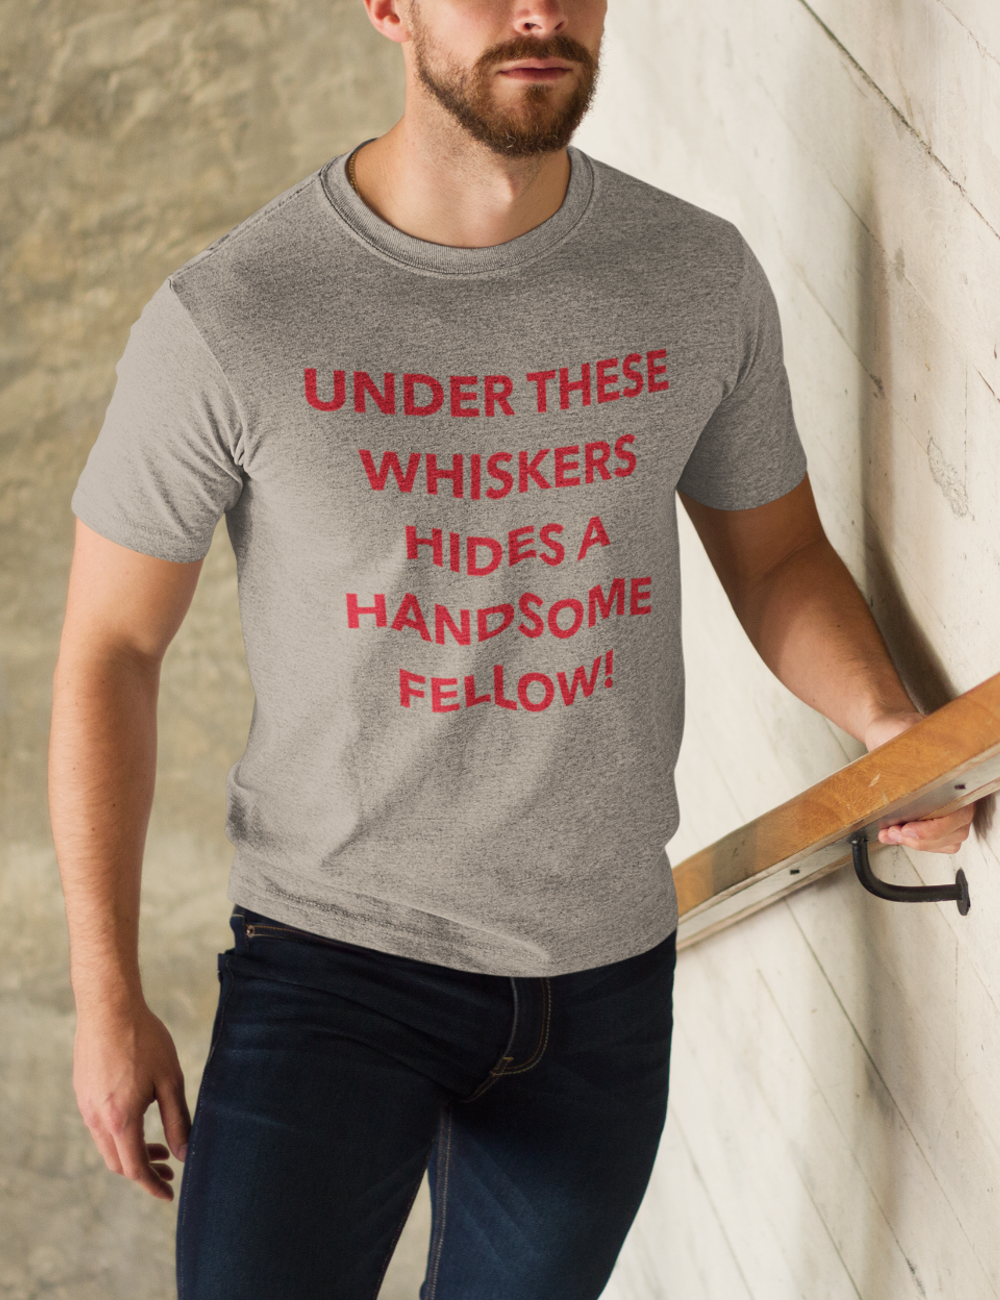 Under These Whiskers Hides A Handsome Fellow Men's Classic T-Shirt OniTakai